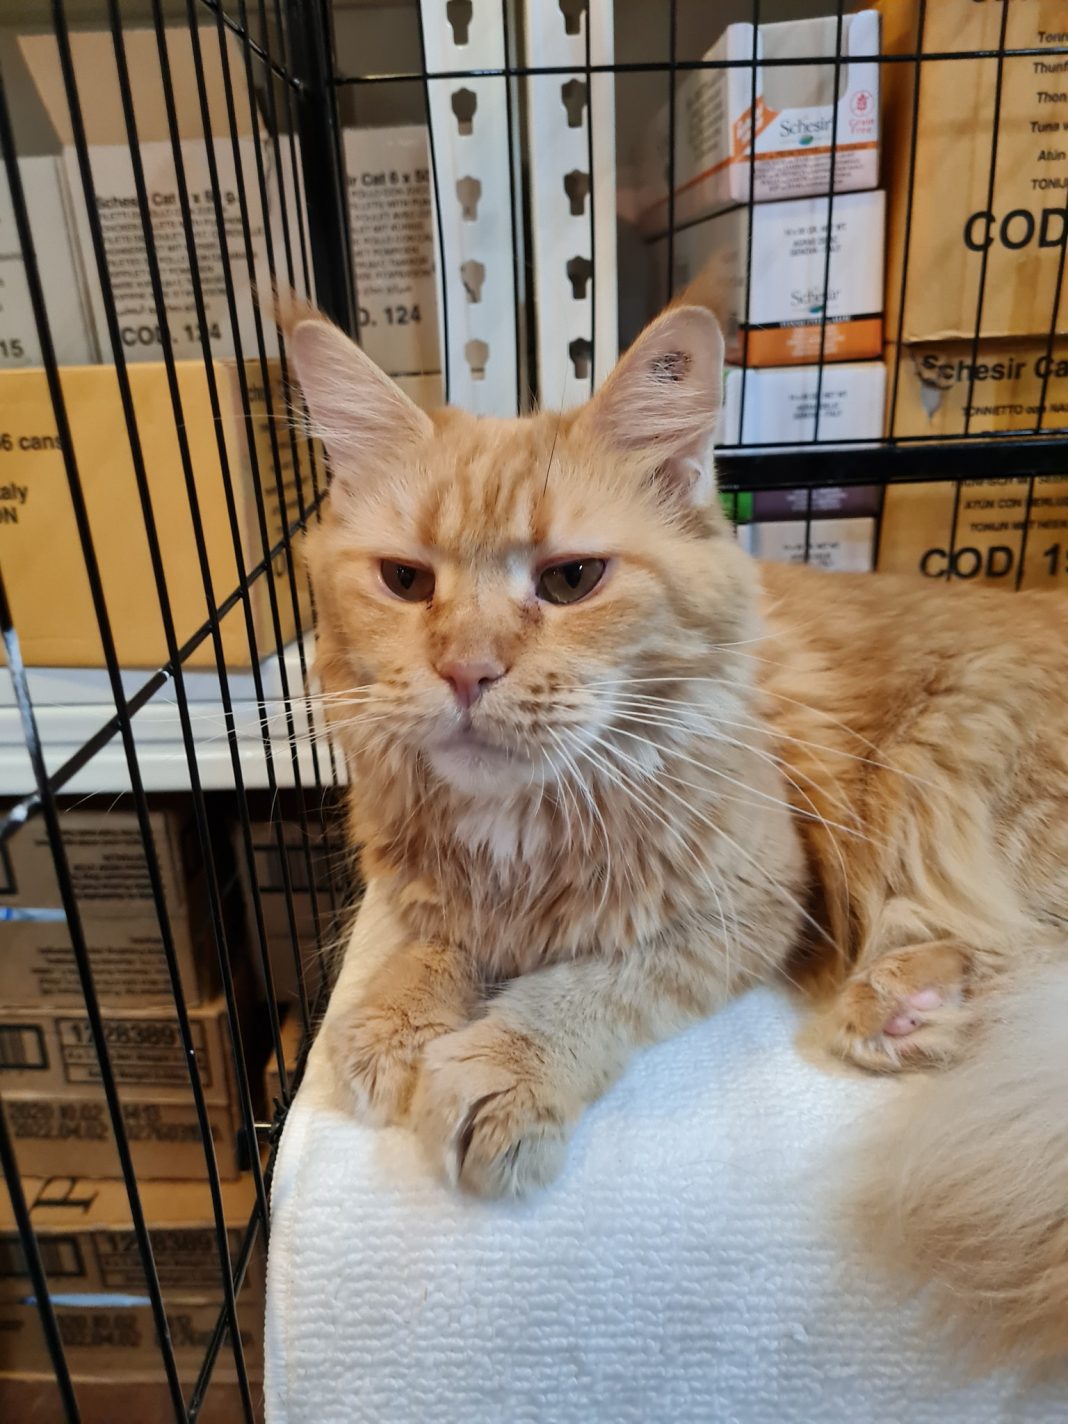 5 Adorable Maine Coon Cats Up For Adoption After Owner Passes Away